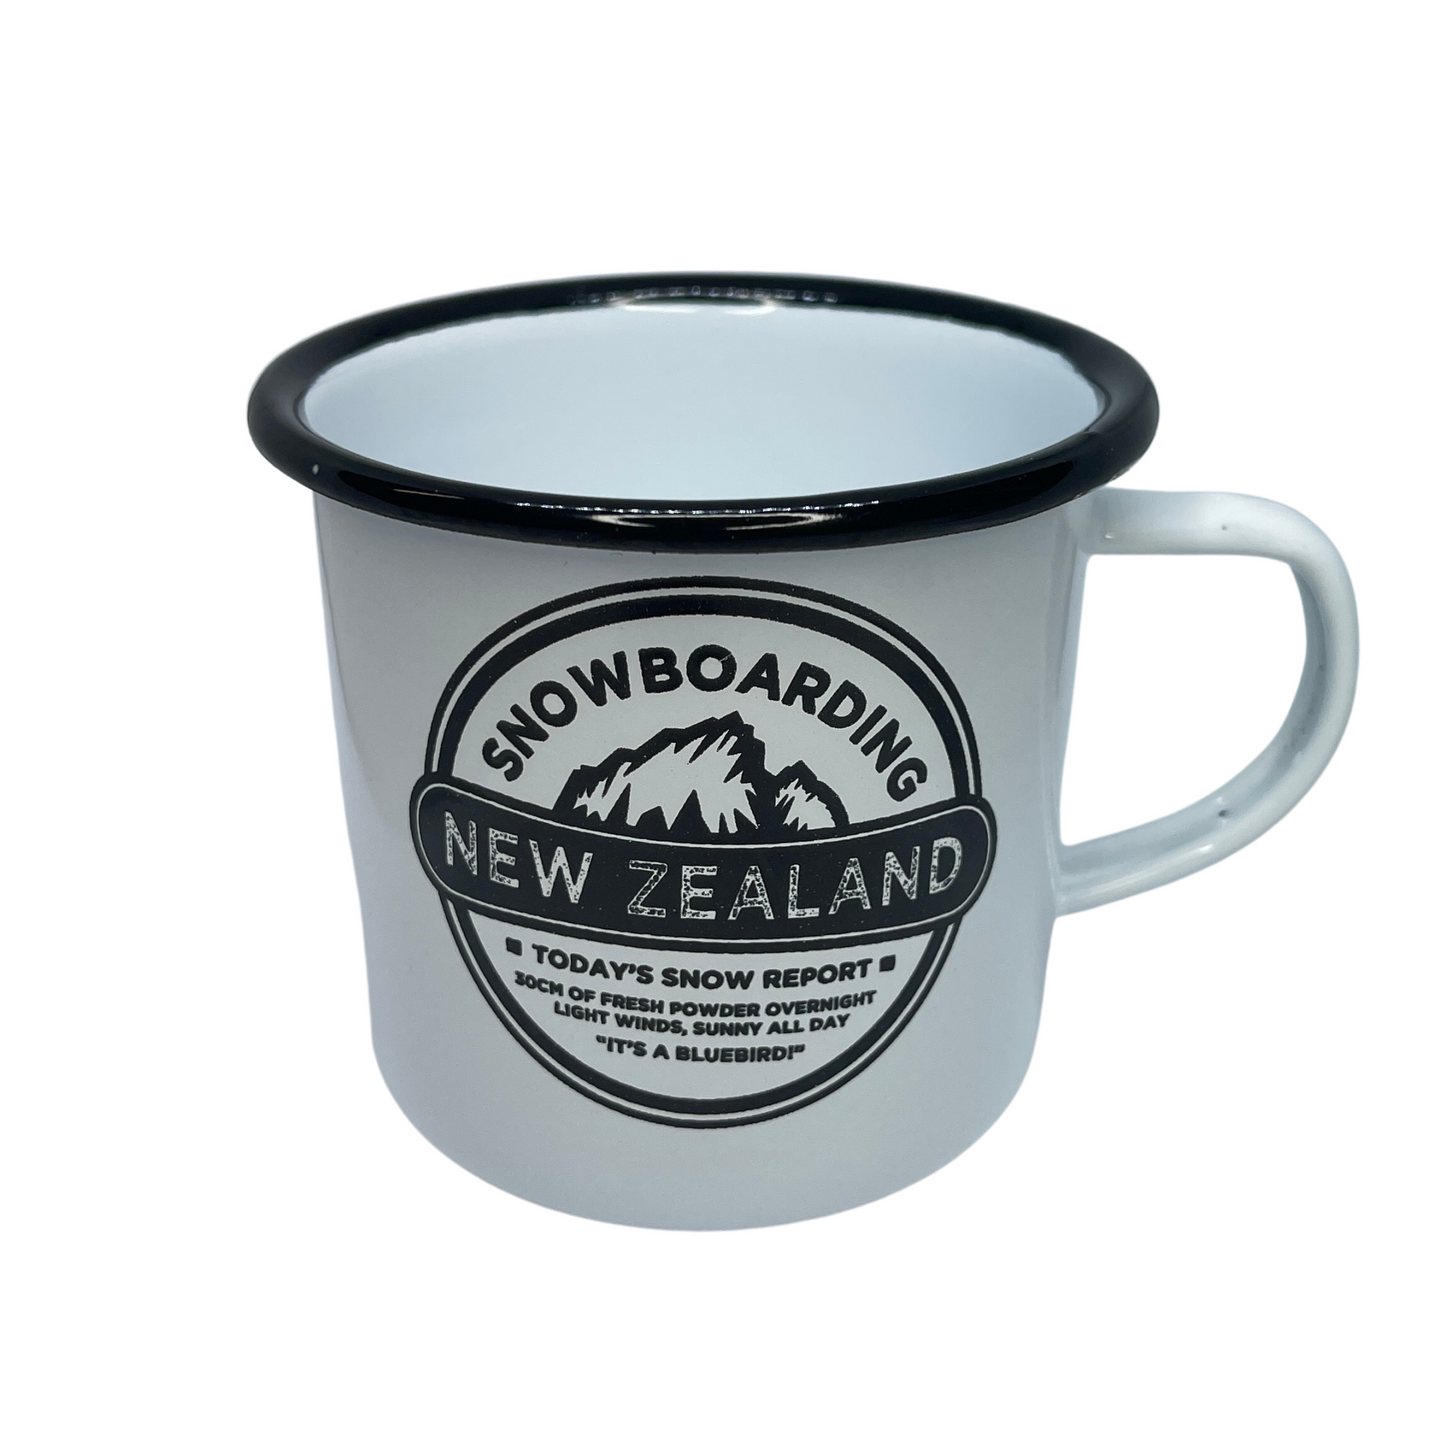 White enamel mug with black trim and image of a mountain with snowboarding new zealand written on it.